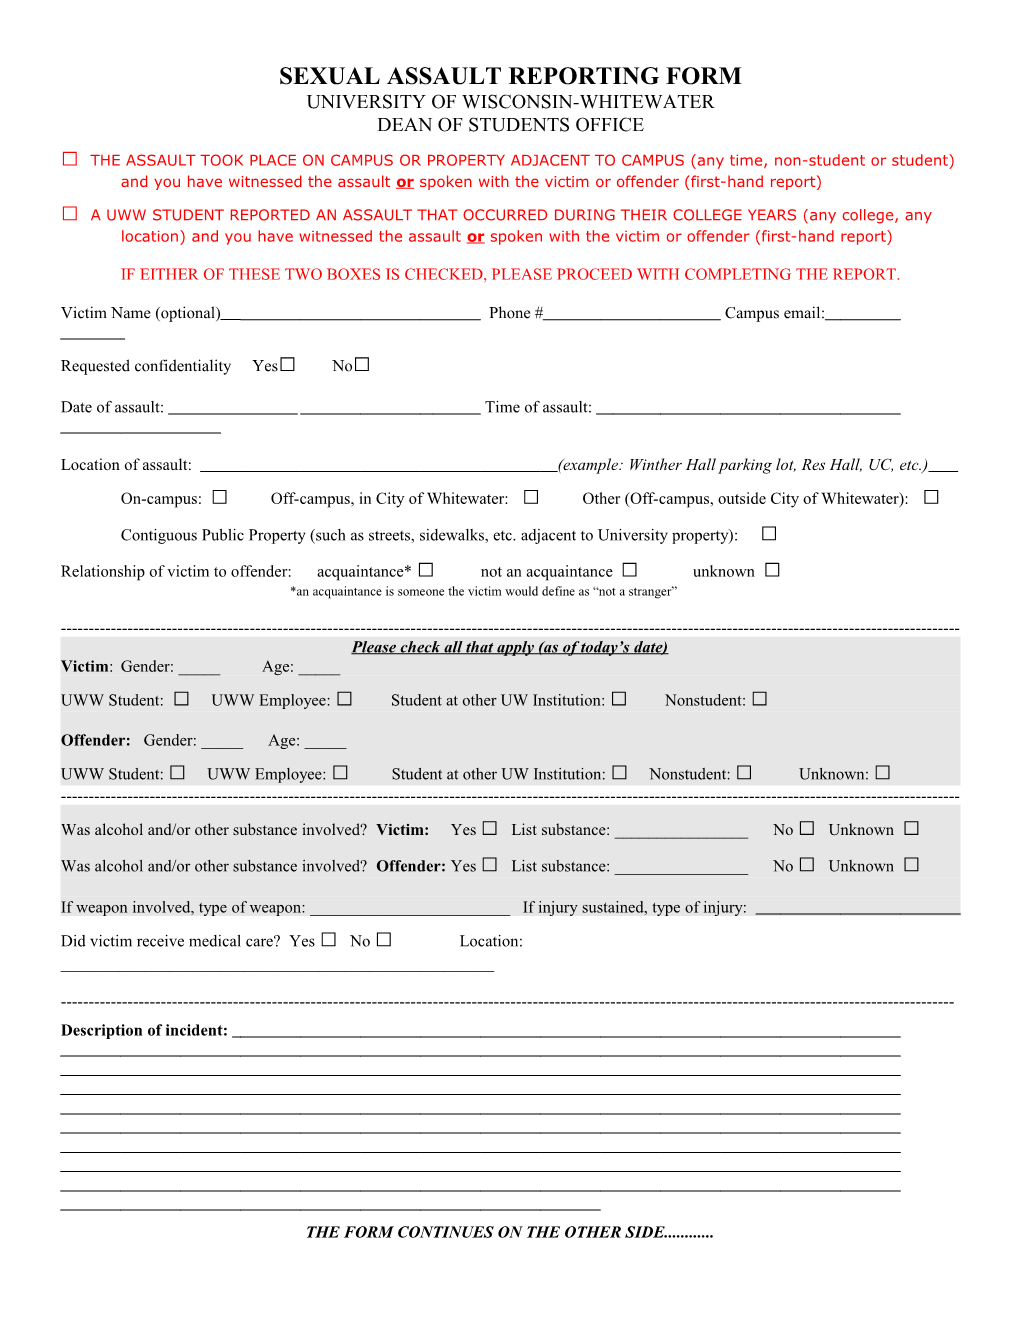 Sexual Assault Reporting Form